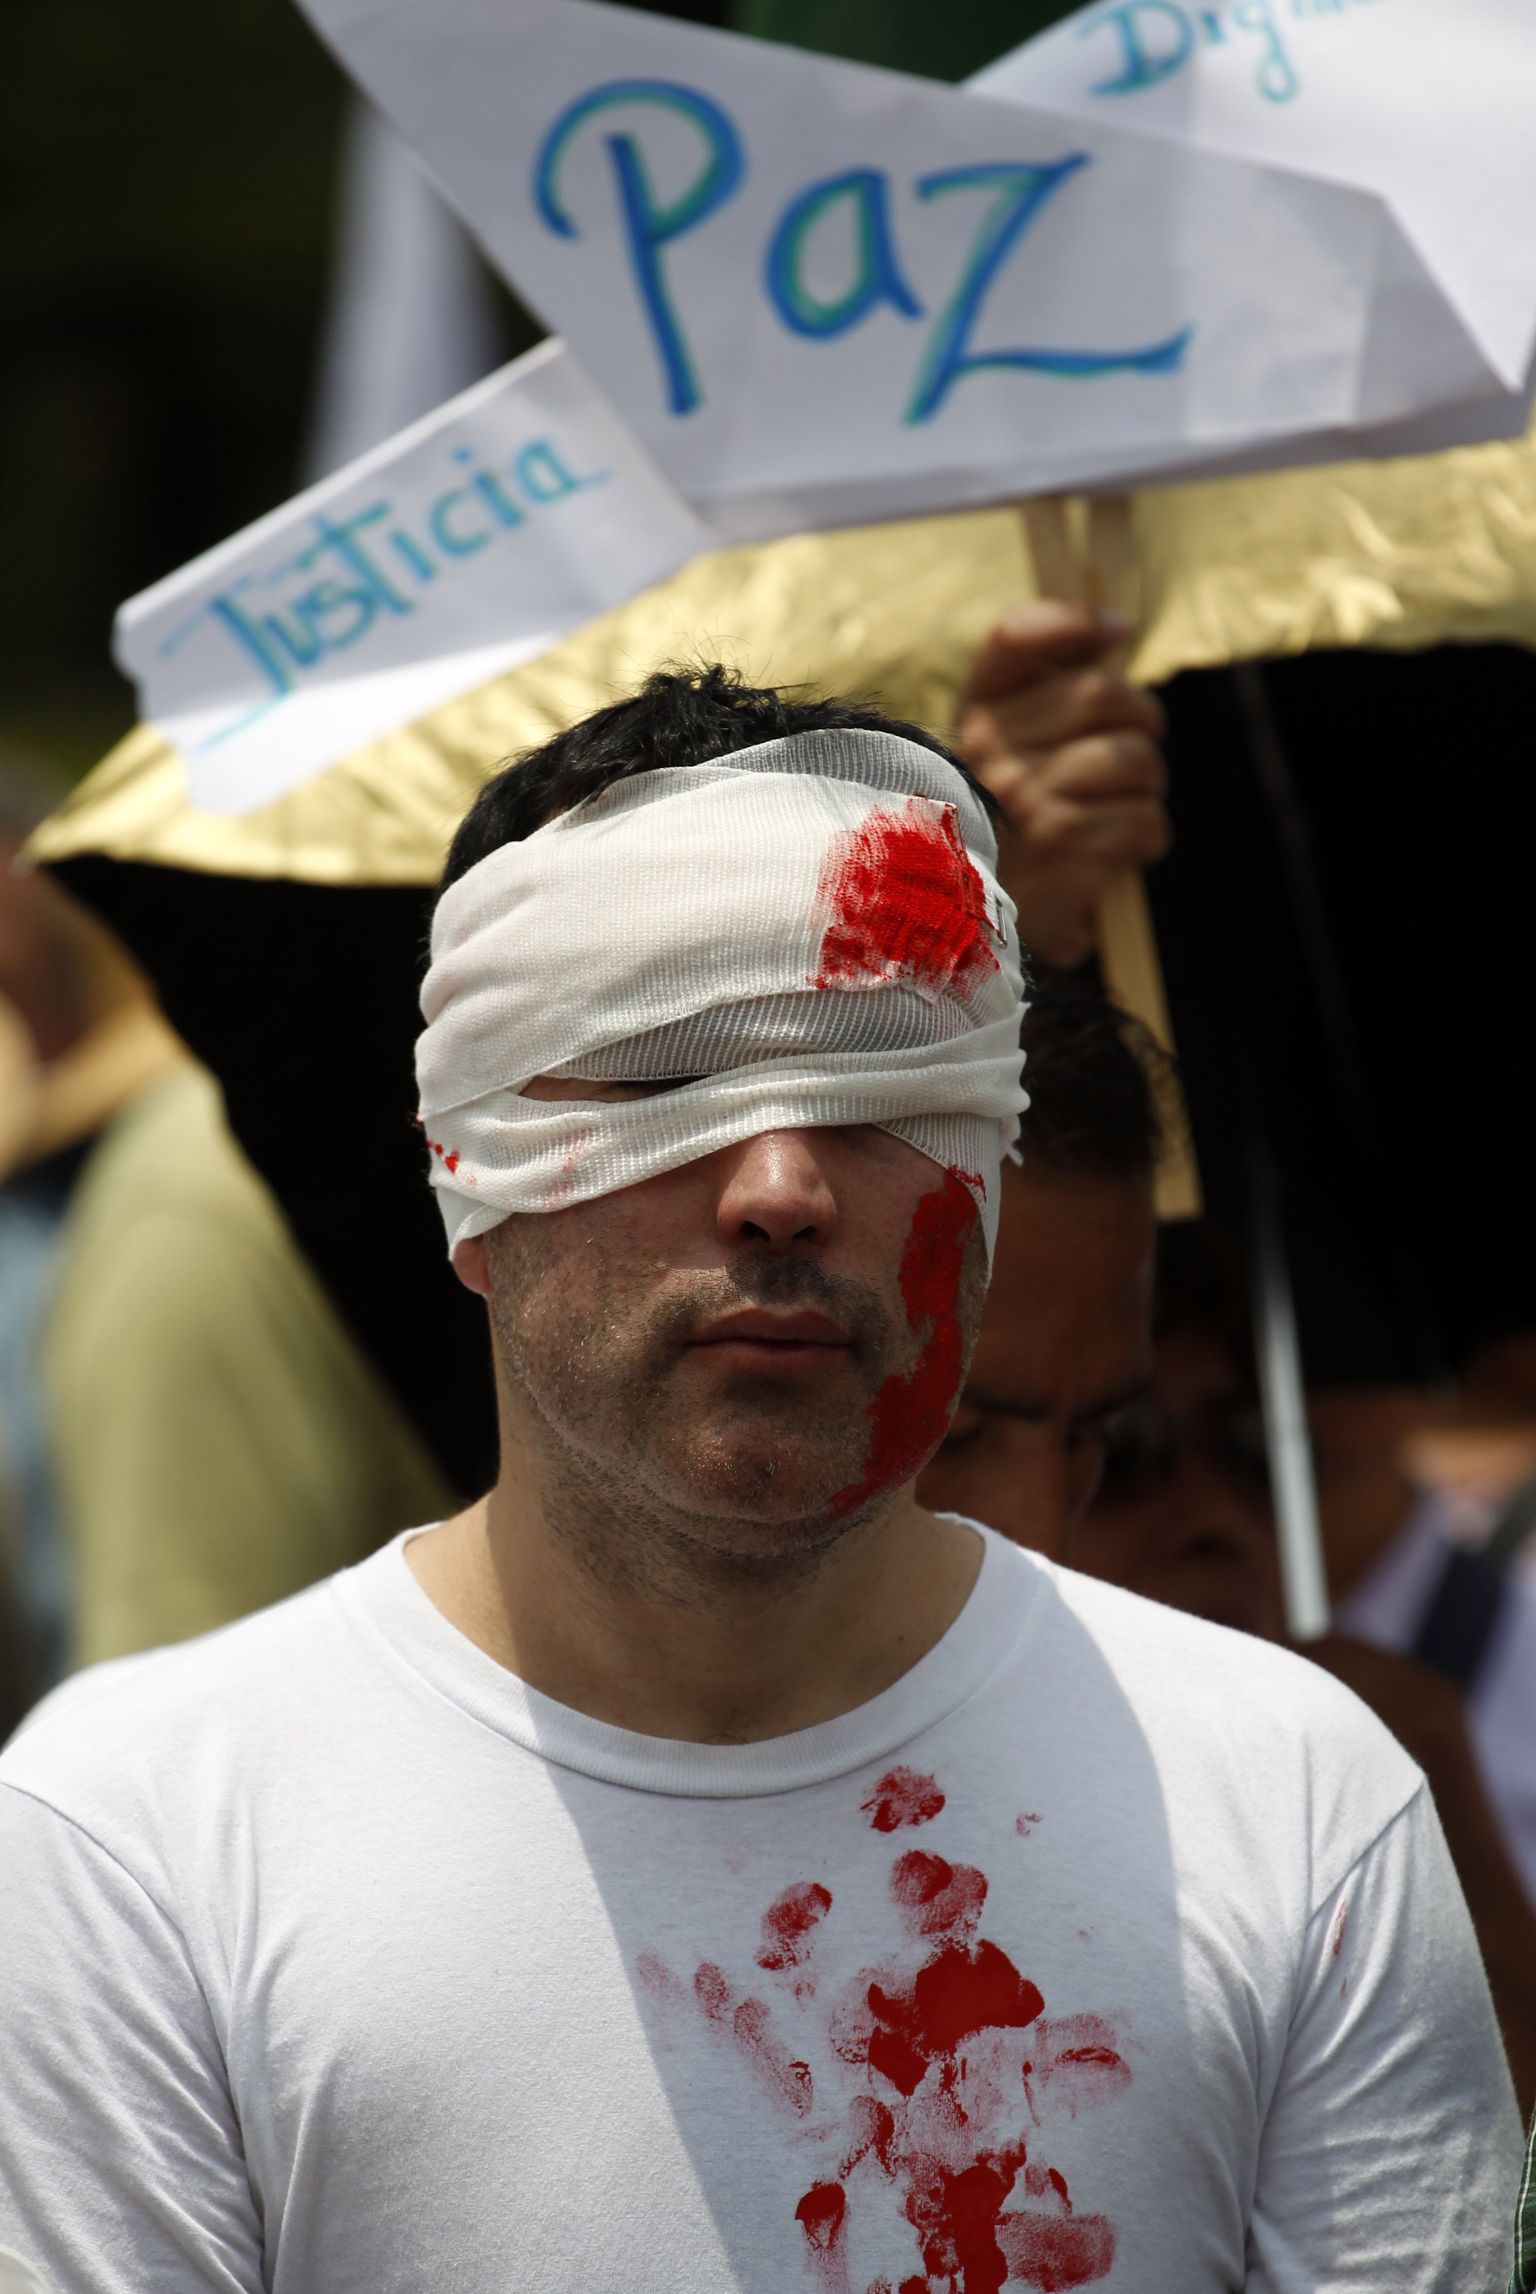 Võltsvere ja sidemetega kaetud vägivallavastane meeleavaldaja eelmisel kuul Mexico City's. 

A demonstrator, who covered his head with bandage and faked blood, attends a march to protest against violence that paused for a few minutes just outside the presidential residence of Los Pinos in Mexico City, Sunday Aug. 14, 2011. The continuing tide of drug-related killings in Mexico has drawn thousands of protesters to march against violence.(AP Photo/Eduardo Verdugo) / SCANPIX Code: 436